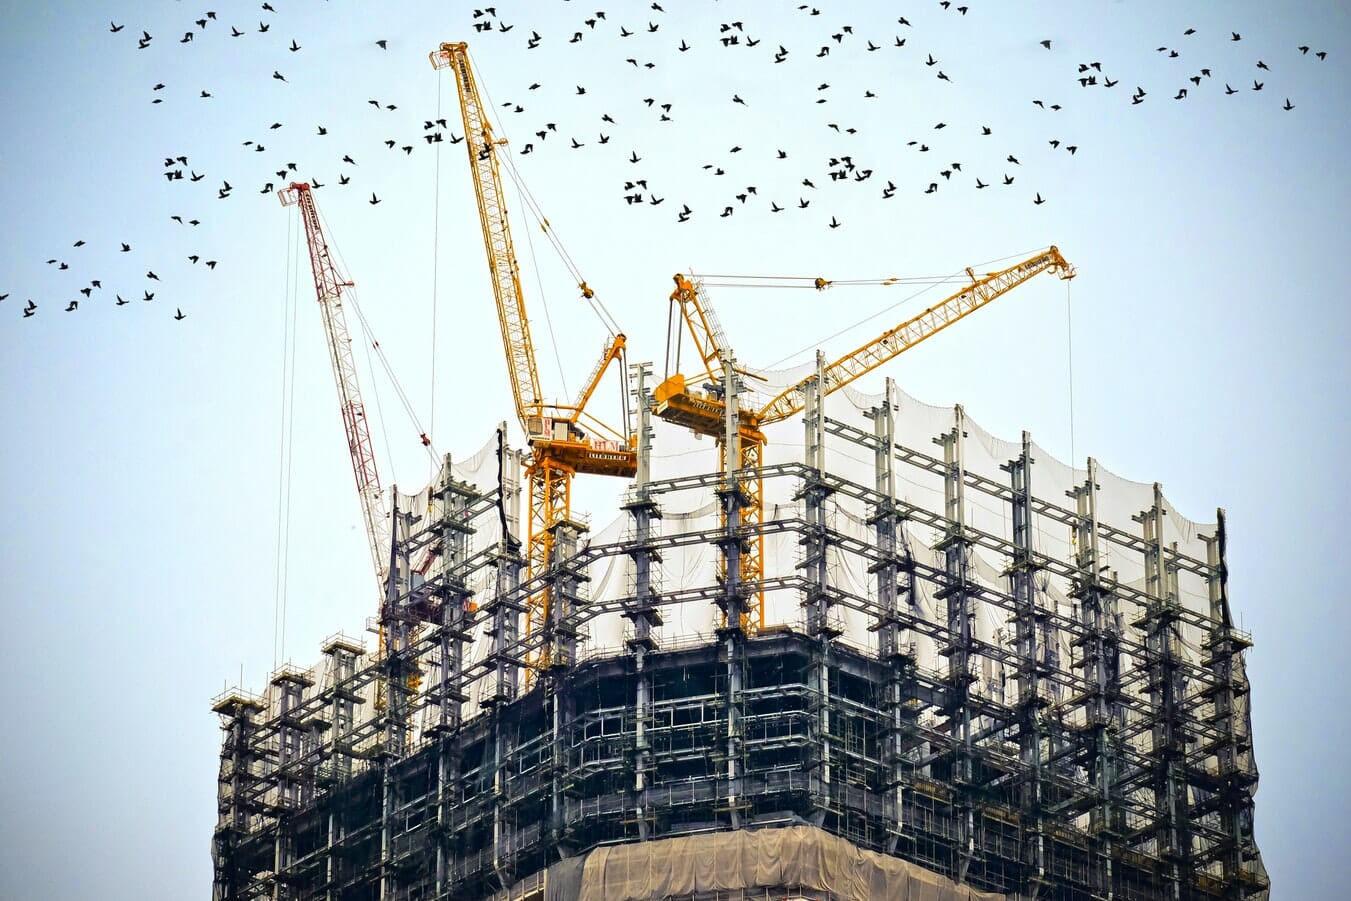 Cranes on a construction site with birds flying around.